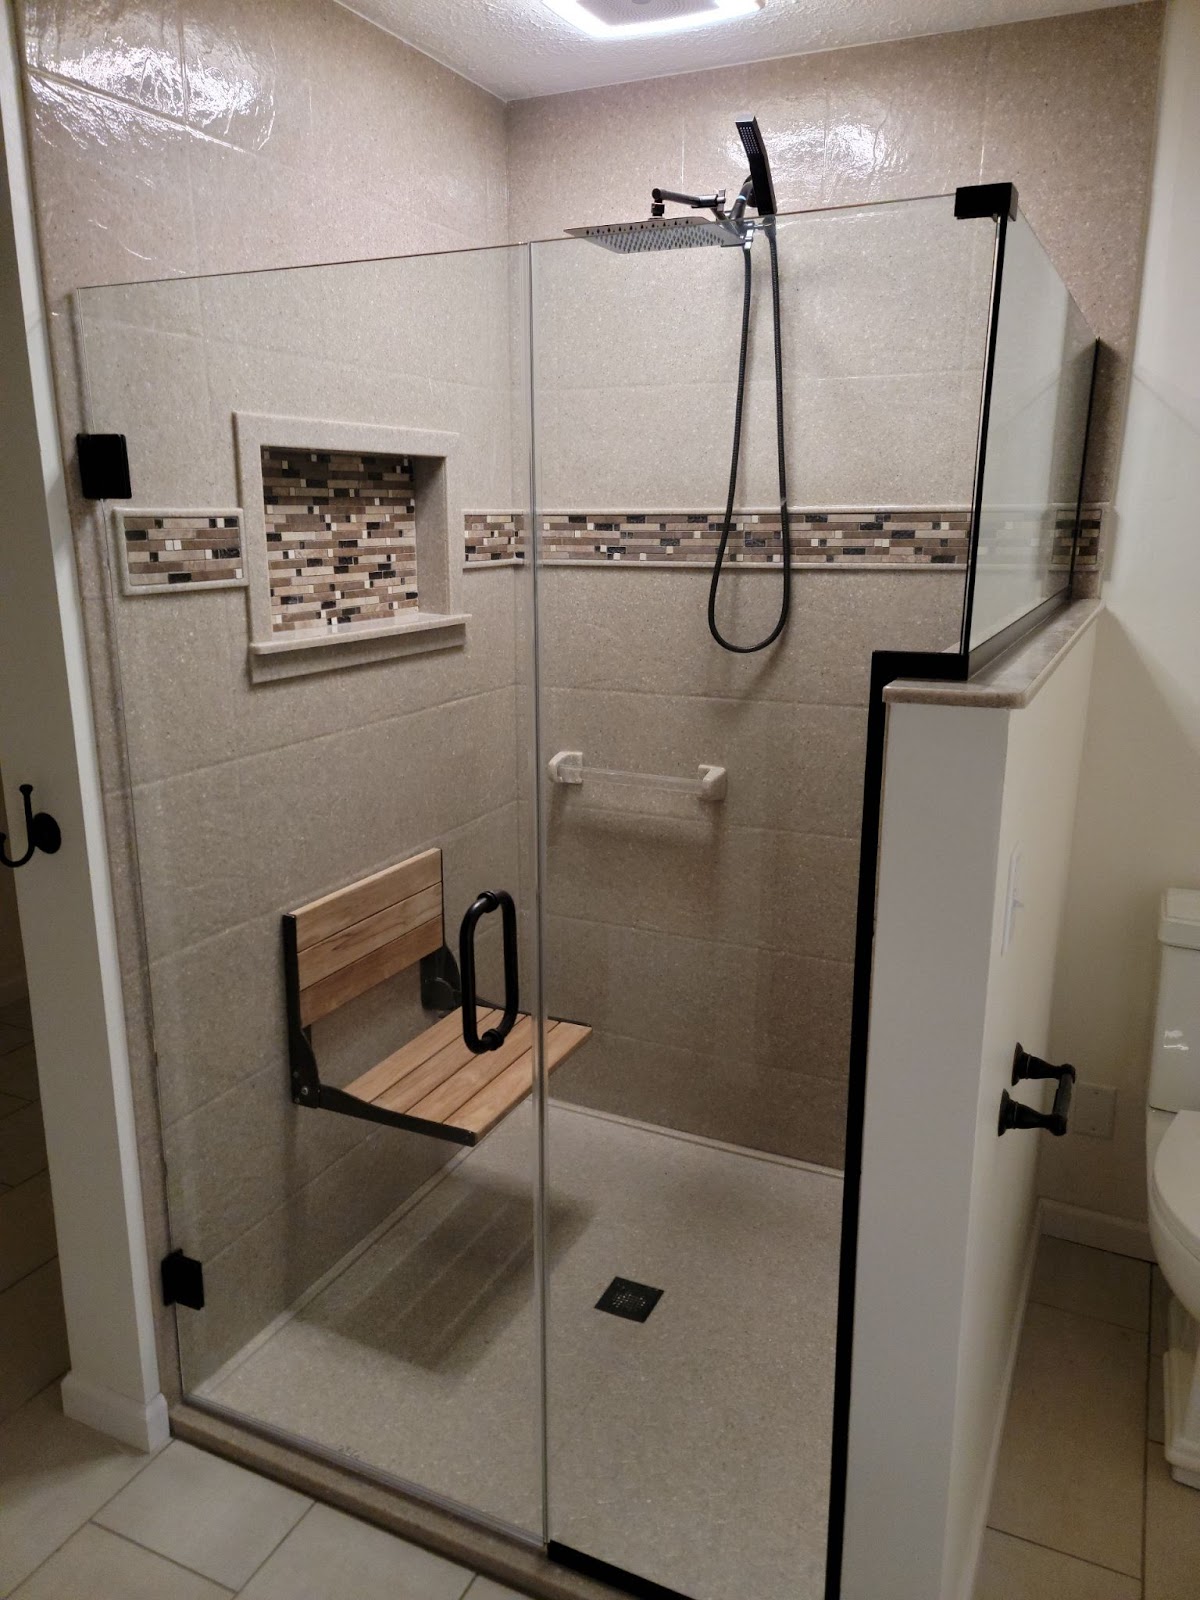 Step into the shower of your dreams when you enlist Hudson Plumbing for your complete bathroom remodeling needs.